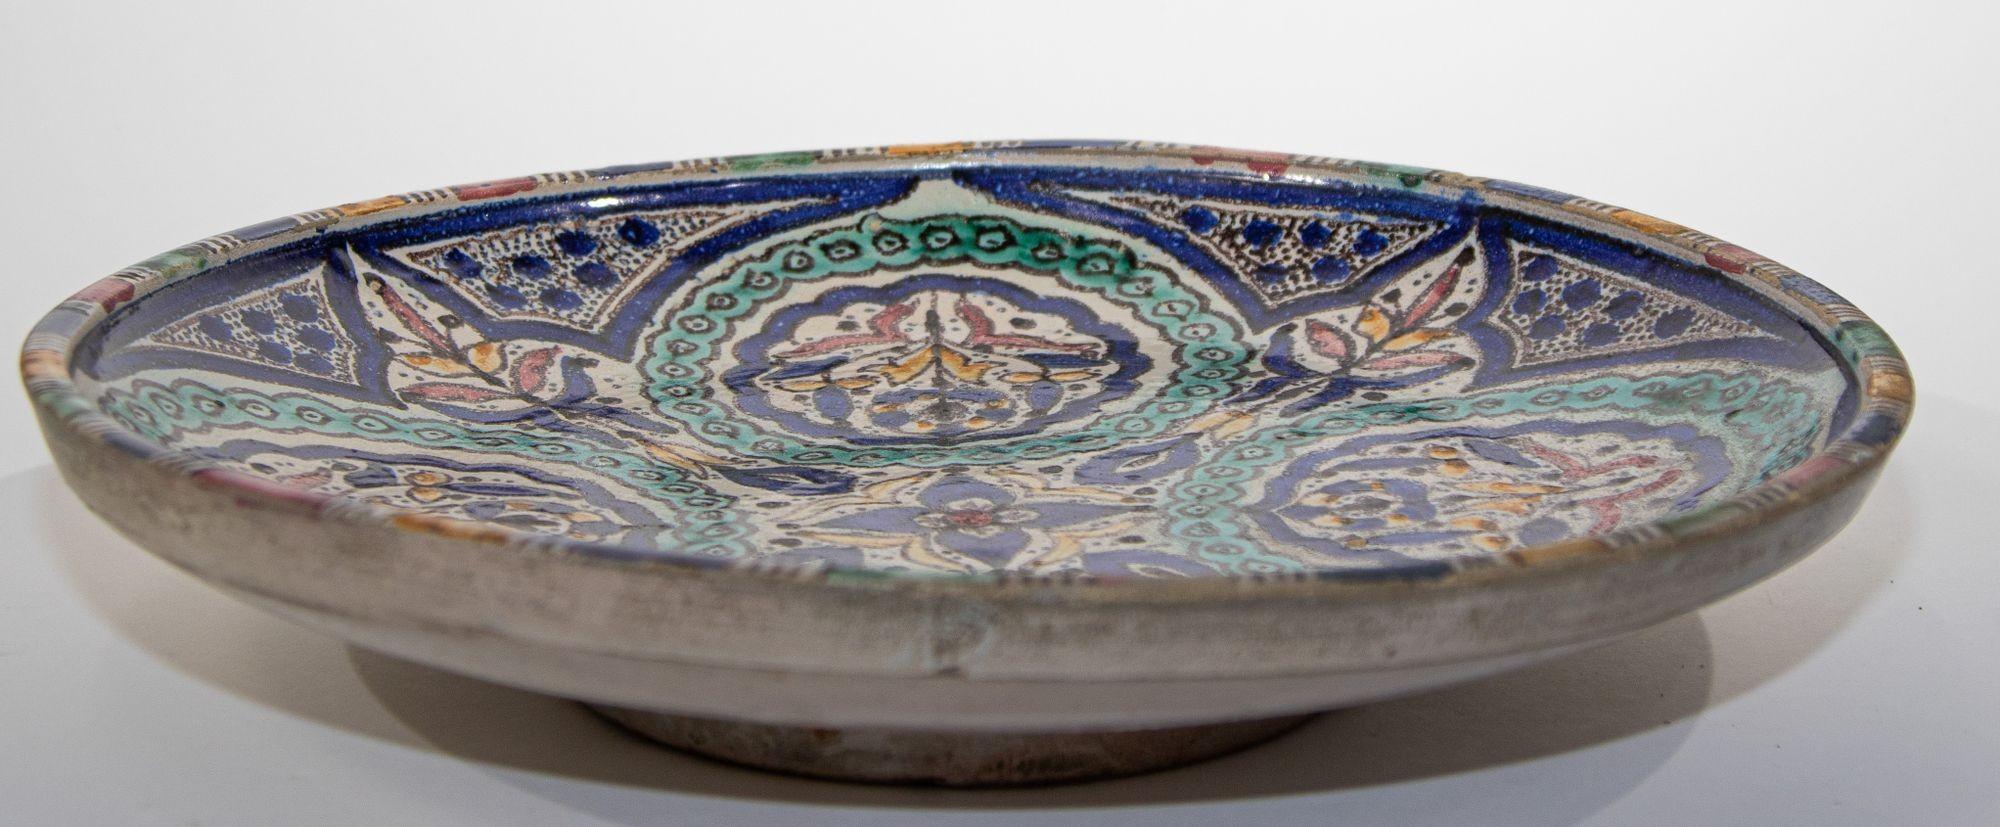 Antique Moroccan Ceramic Bowl from Fez 1920's For Sale 8